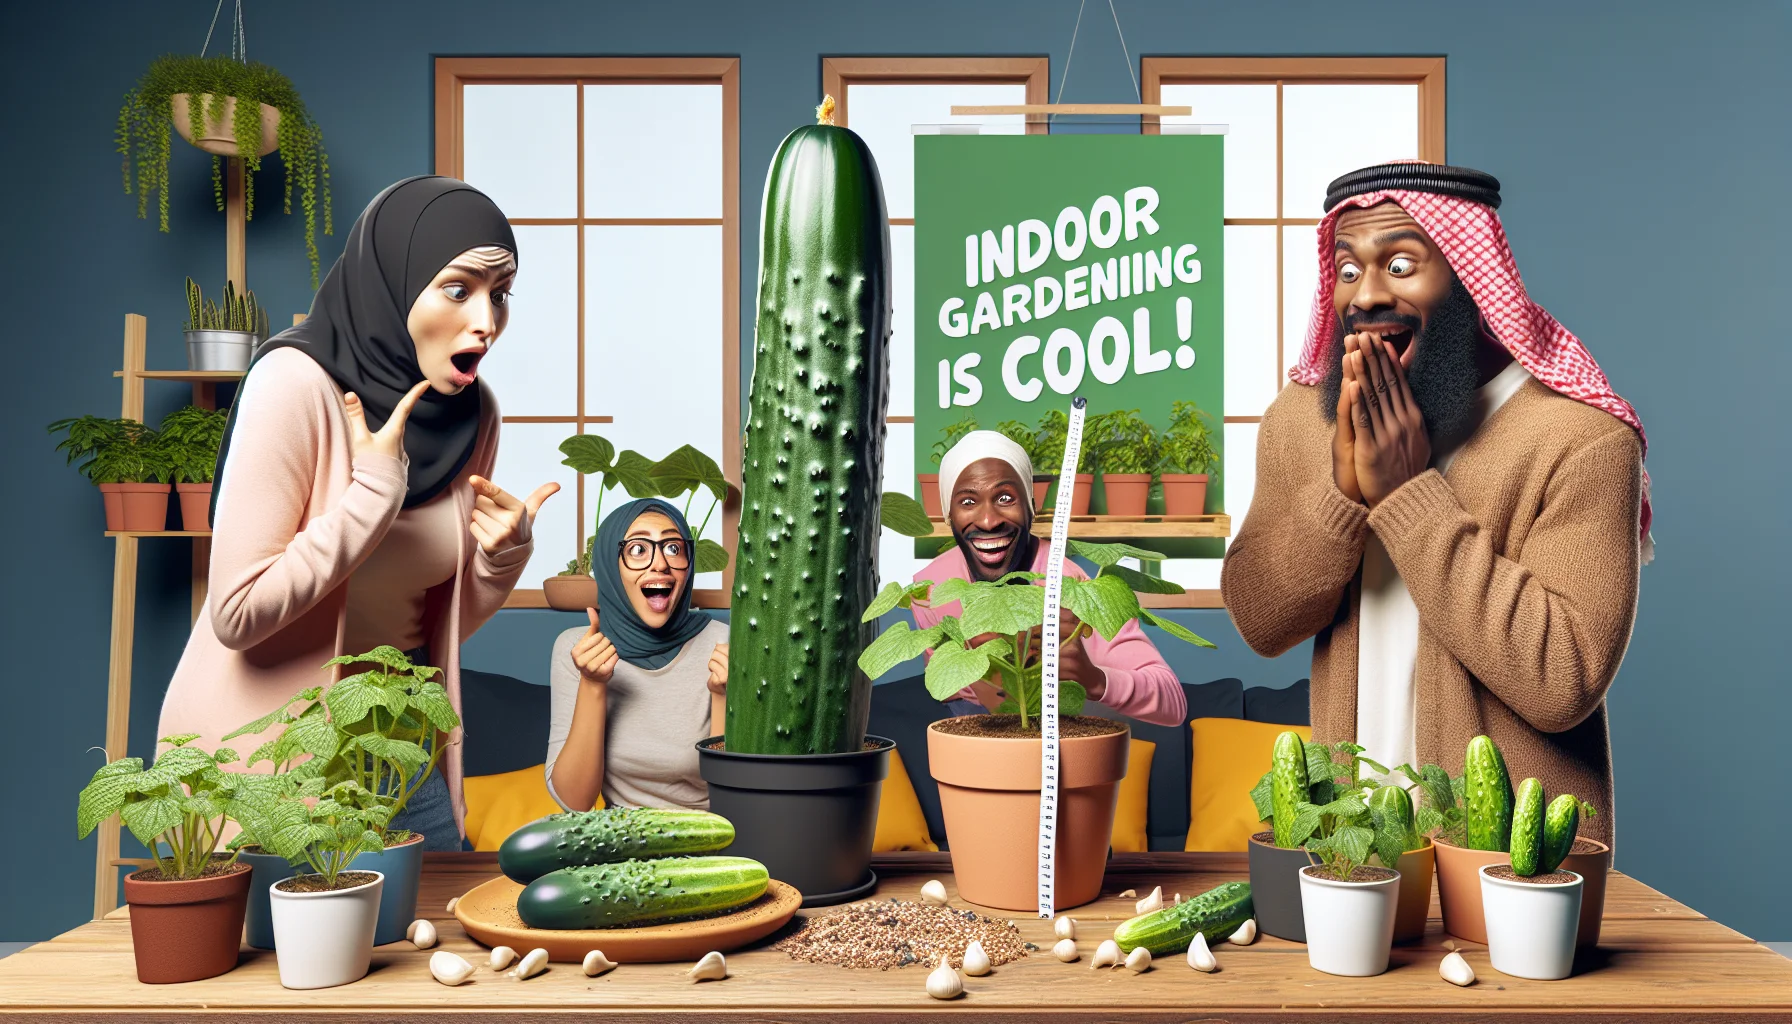 A humorous, realistic scenario in an indoor setting focused on cucumbers growing in pots. Spend time to showcase the advancements of the plants from seeds to fully grown cucumbers. Include various indoor plants around to enhance the lush, green environment. Let's have human characters interacting with these cucumbers, such as a surprised Middle-Eastern woman noticing a cucumber that's grown larger than usual, and a Black male laughing aloud while measuring the length of another cucumber. In the background, put up a poster saying 'Indoor Gardening is Cool!' to bring joy, relaxation and promote the benefits of gardening.